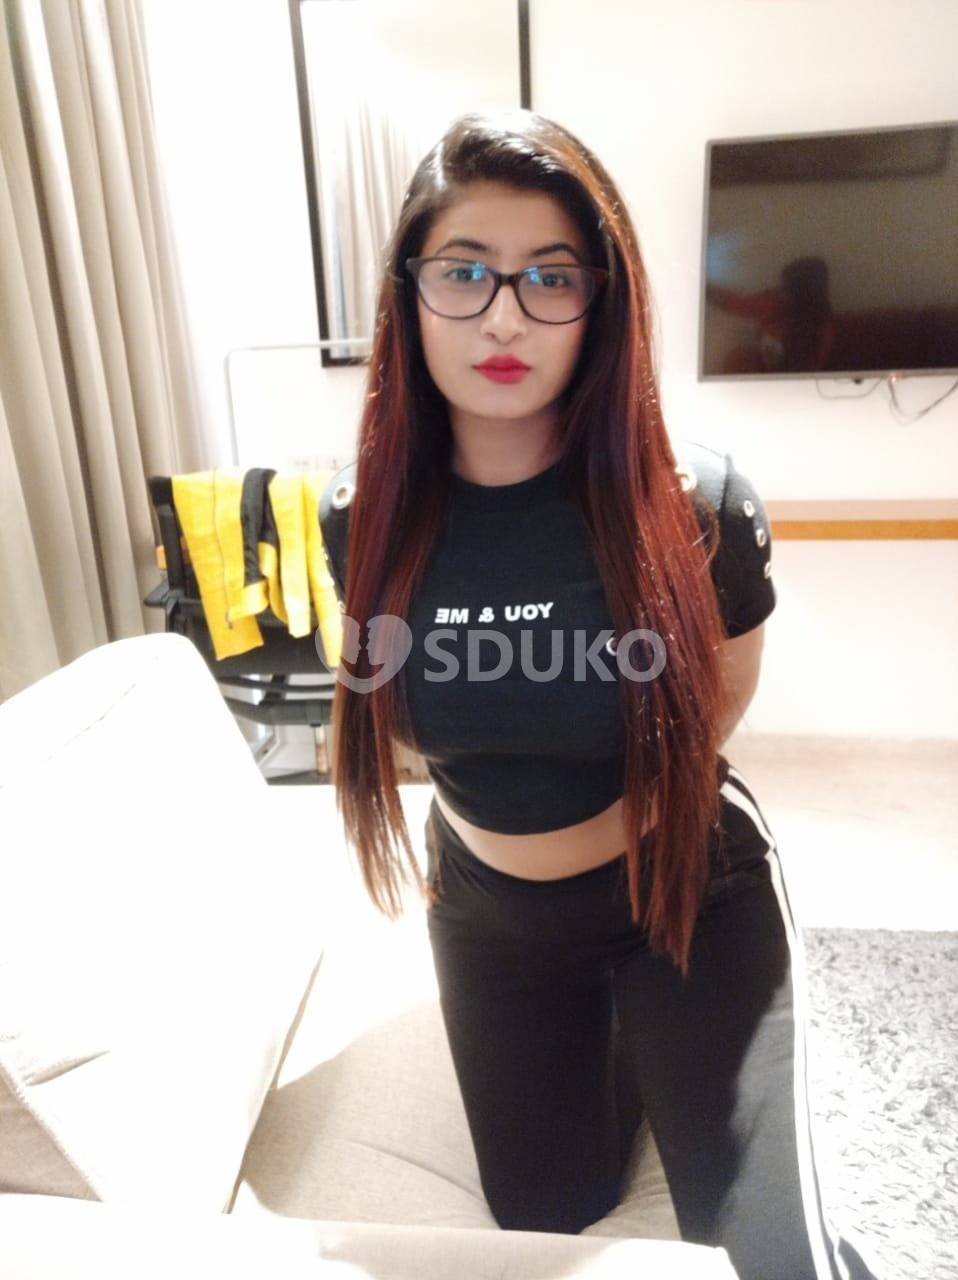 Mumbai 👉 Low price 100%;::::.:.: genuine👥sexy VIP call girls are provided👌safe and secure service .call 📞